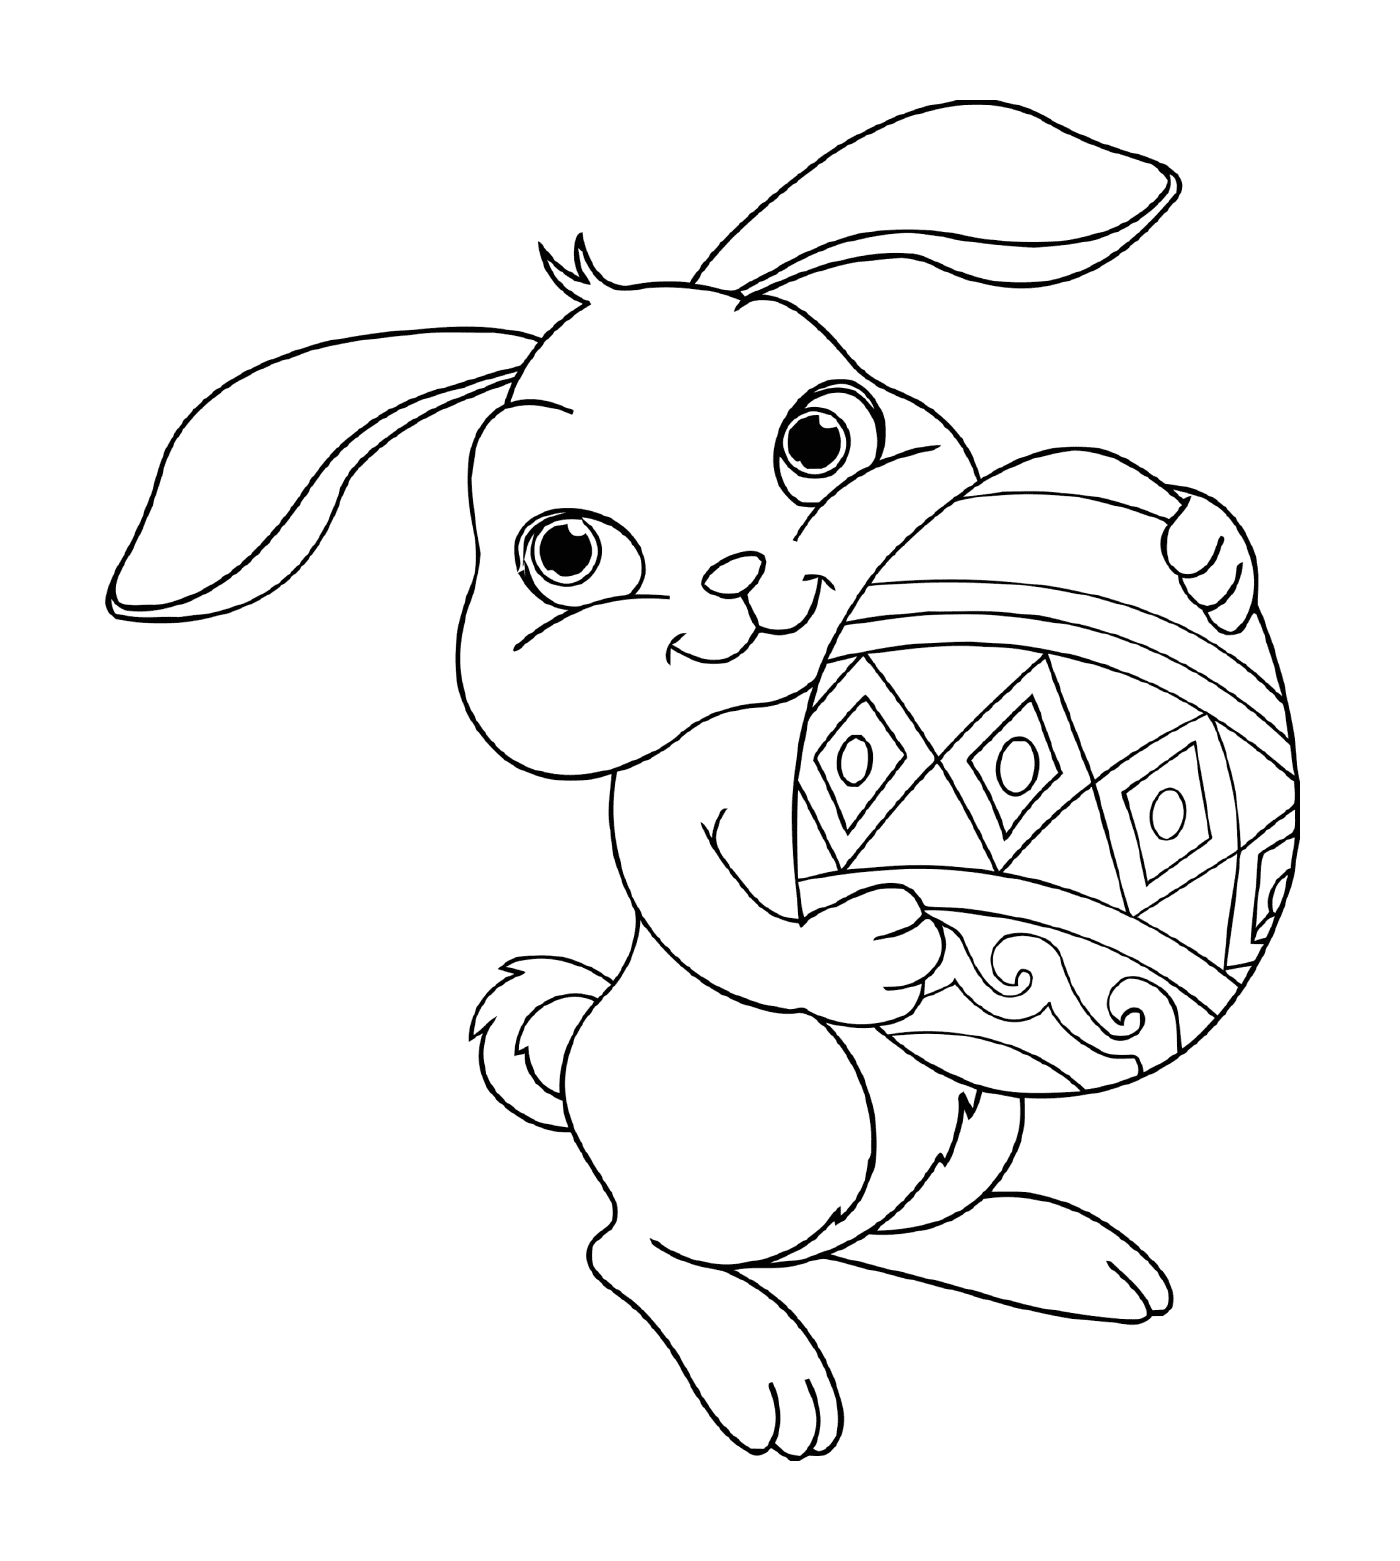  A Happy Easter Rabbit 